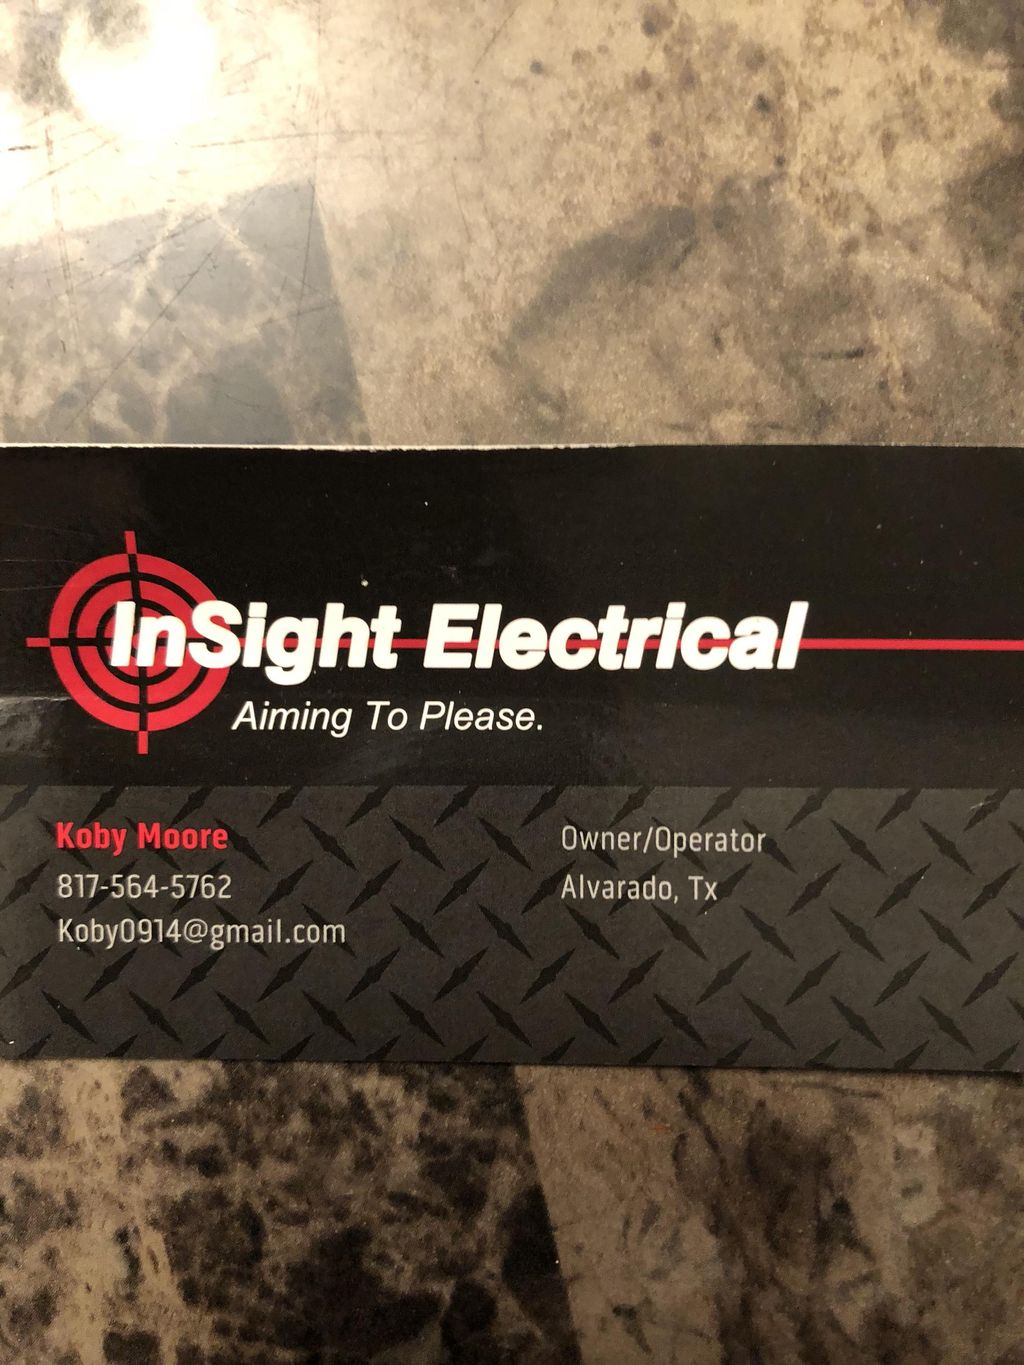 InSight Electrical